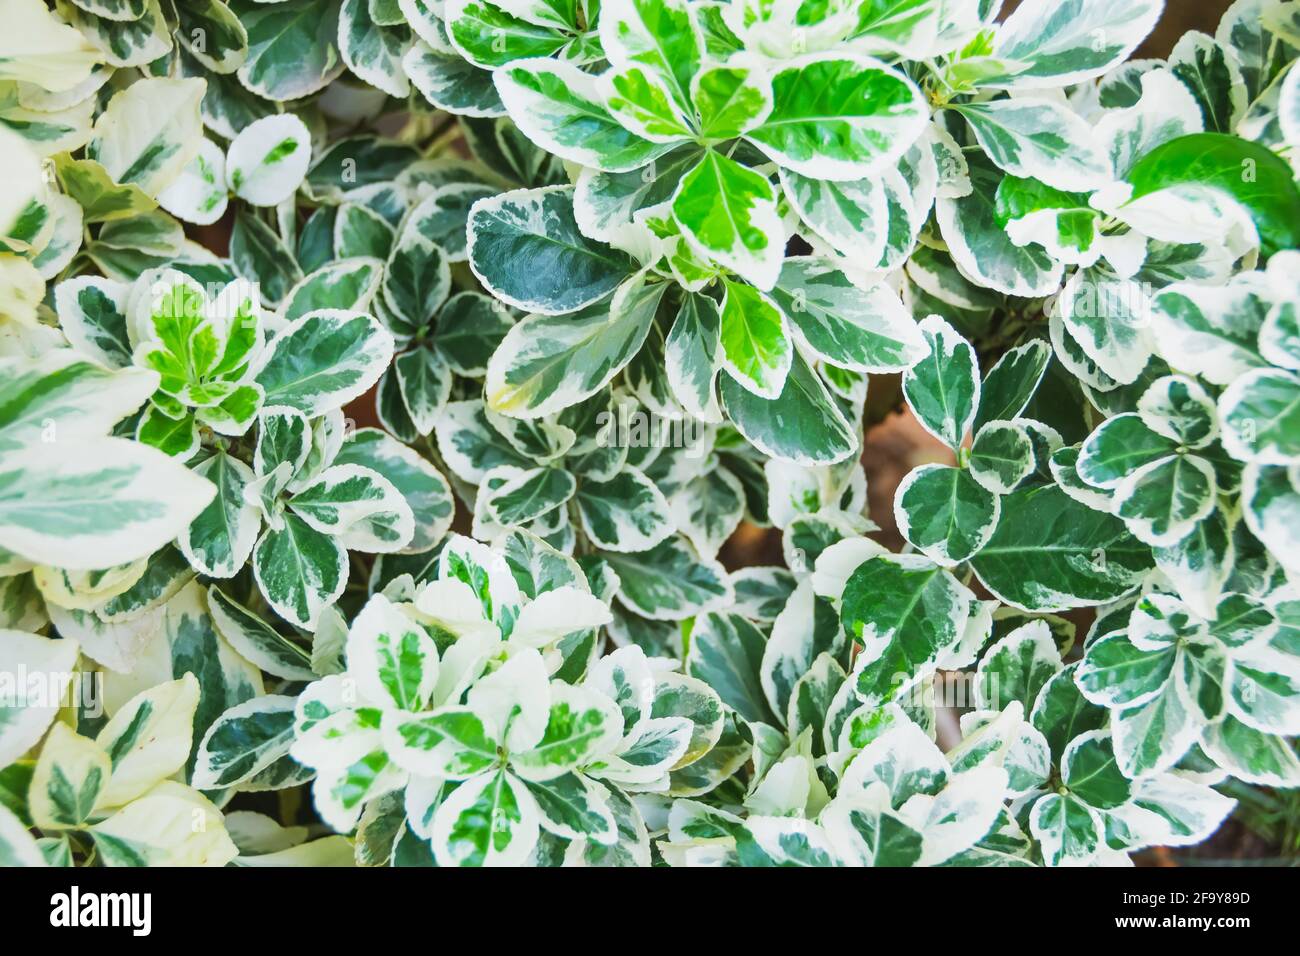 Colors leaf of Japanese spindle tree and white flowers. Euonymus japonicus Stock Photo